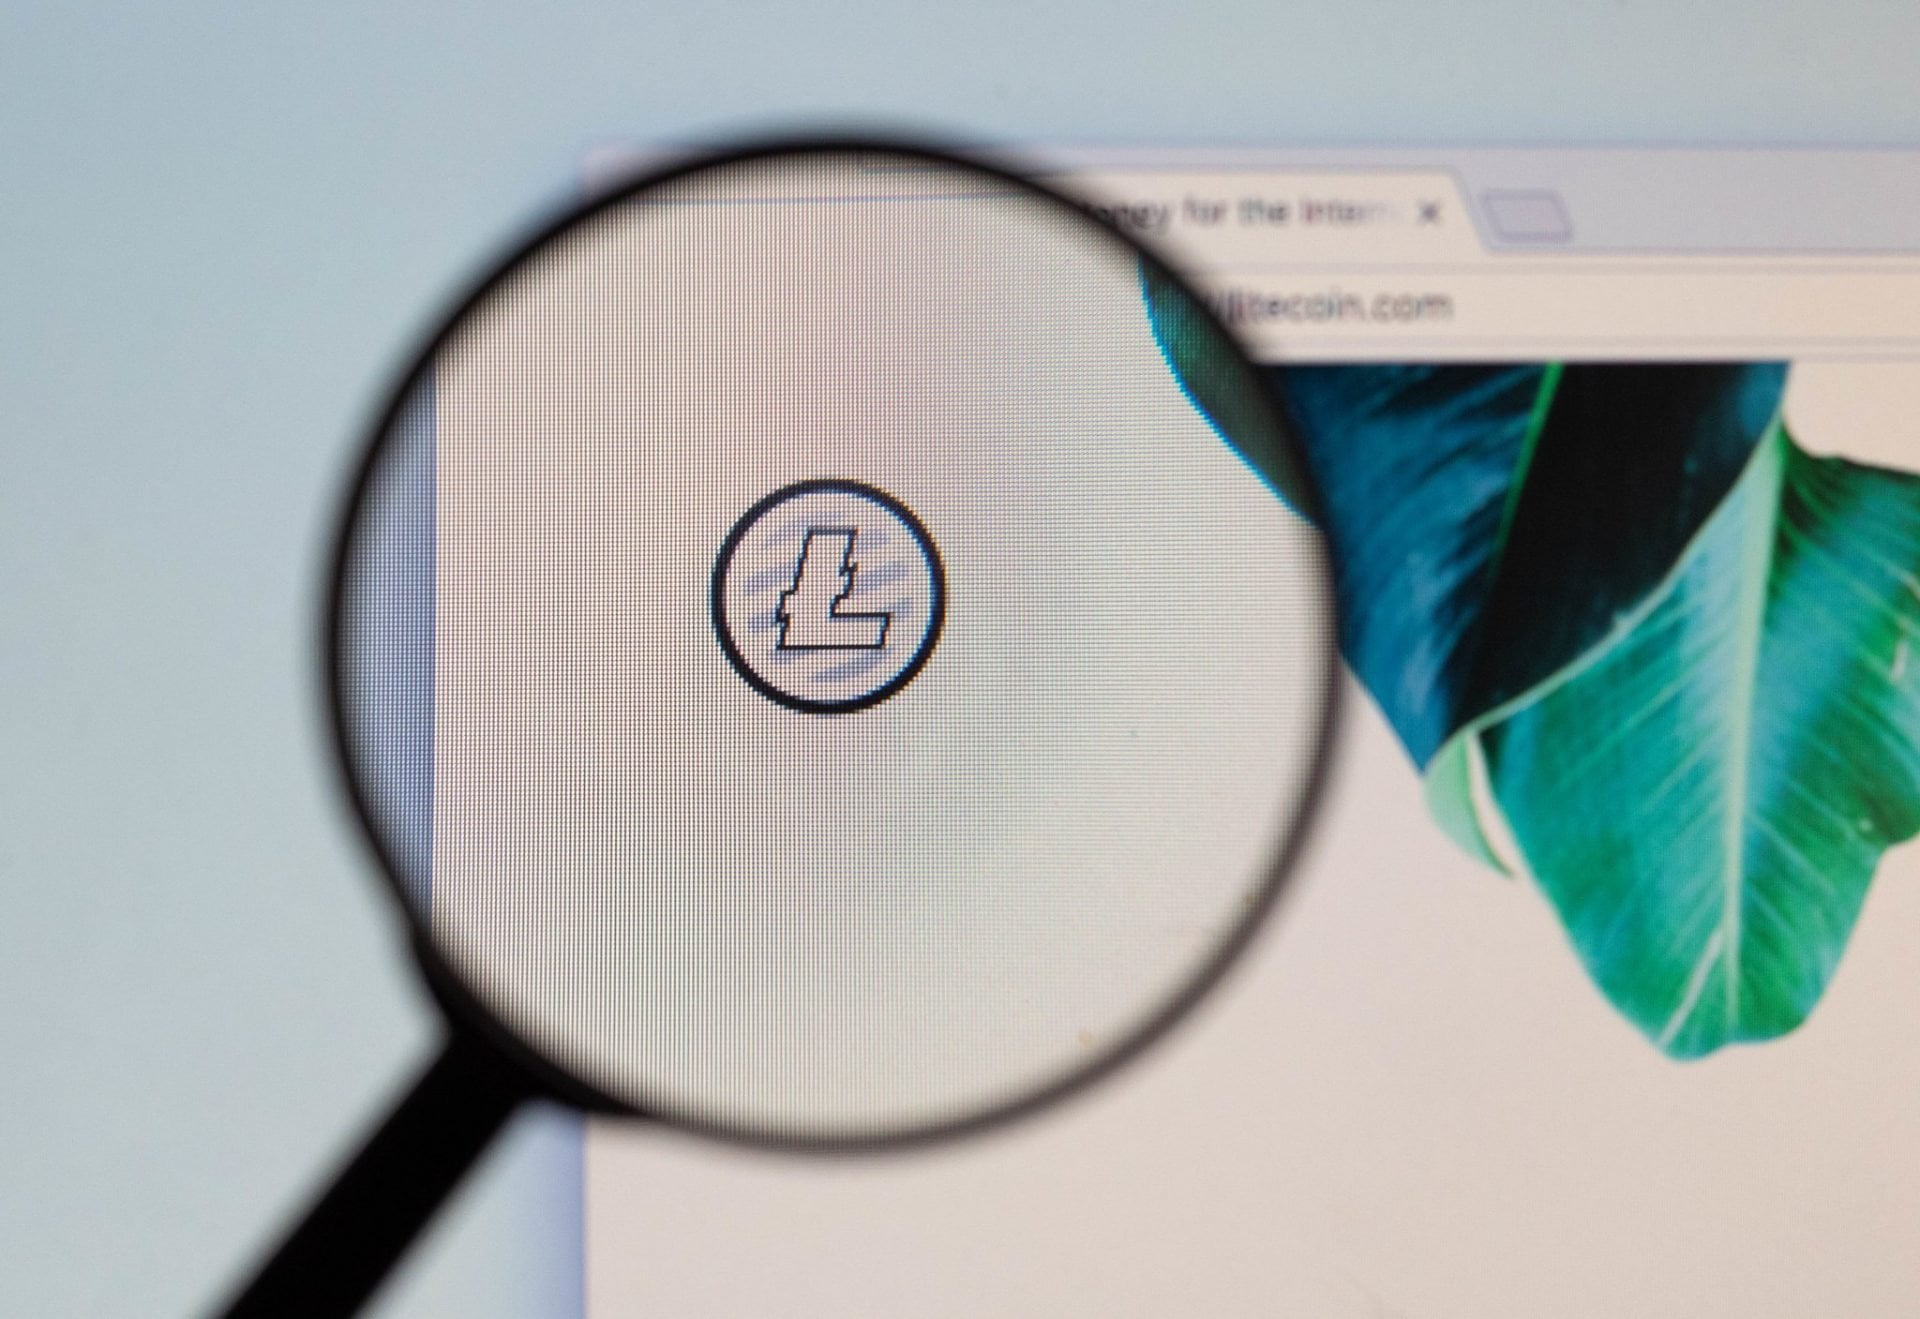 Litecoin Foundation Board Reassures Crypto Community After "FUD" 17